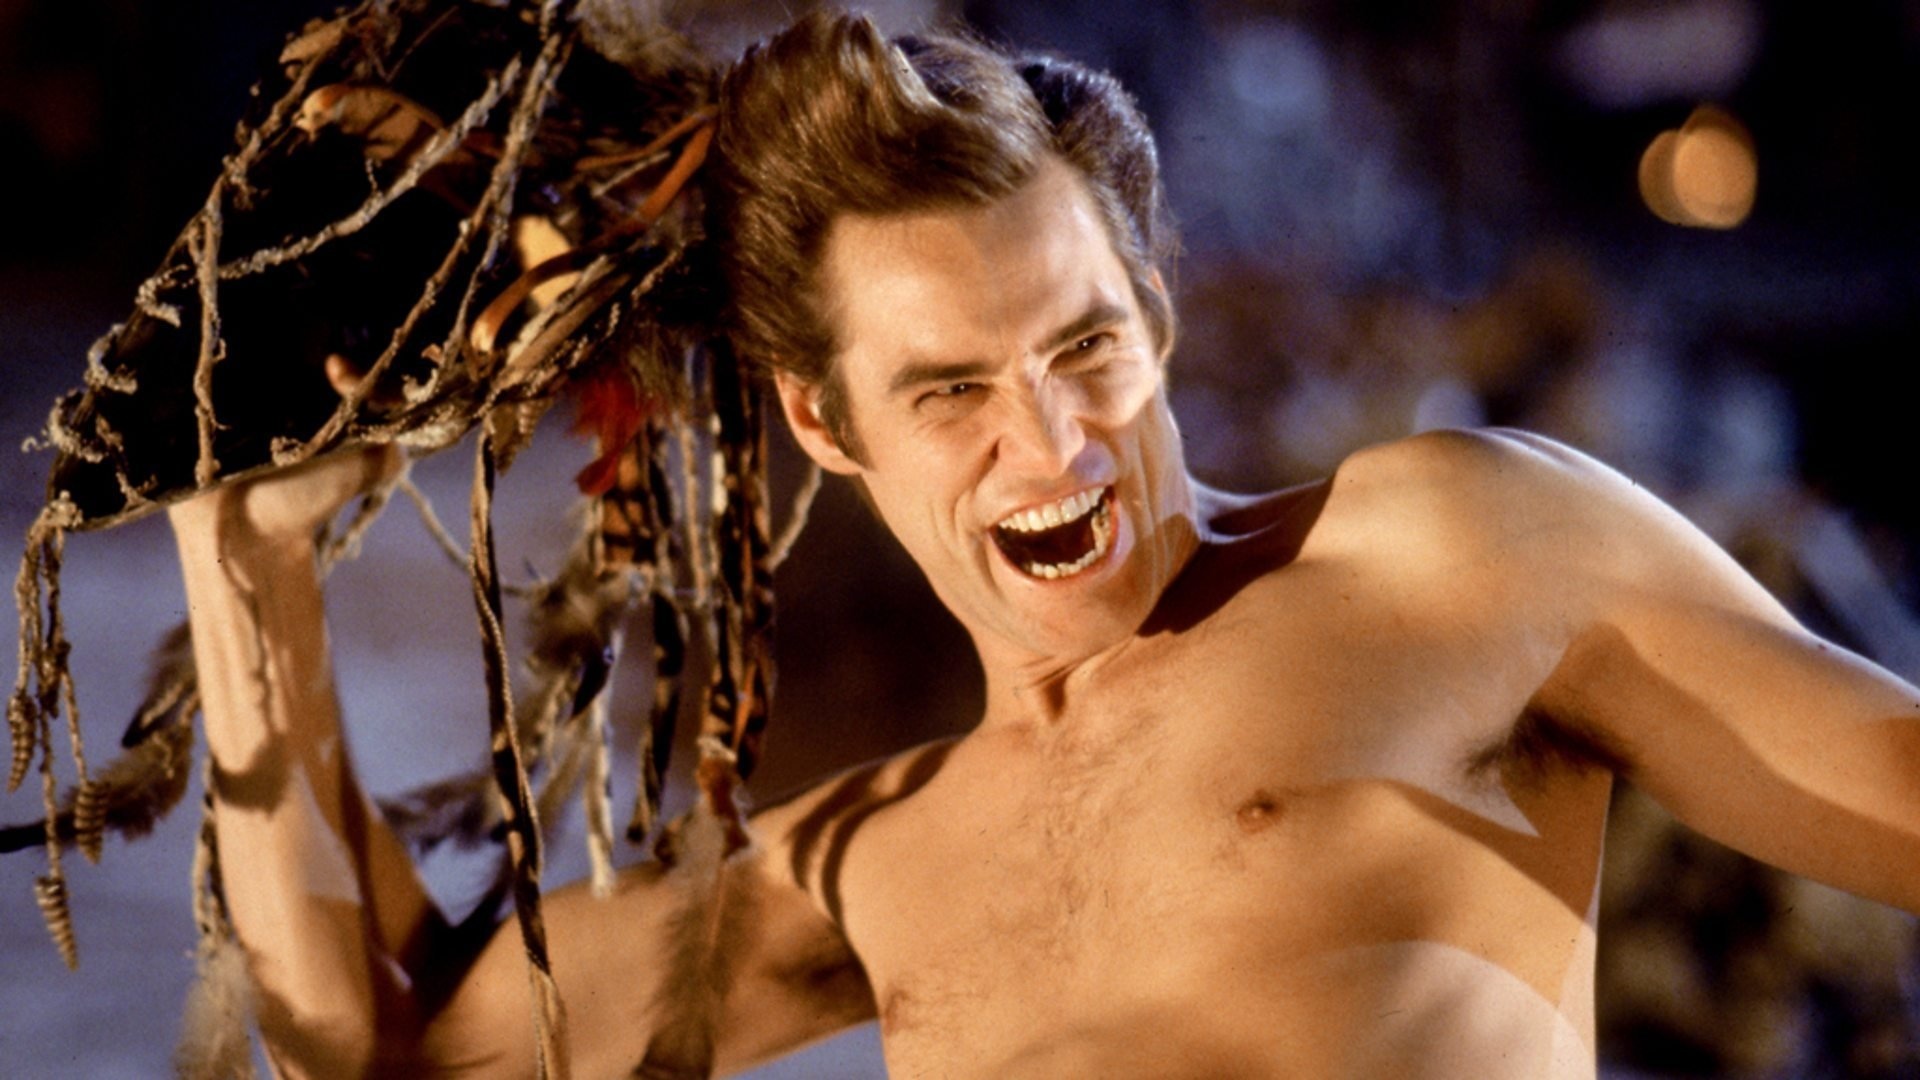 Ace Ventura: Accompanied by his pet capuchin monkey Spike, Ace begins his search for the missing bat. 1920x1080 Full HD Wallpaper.